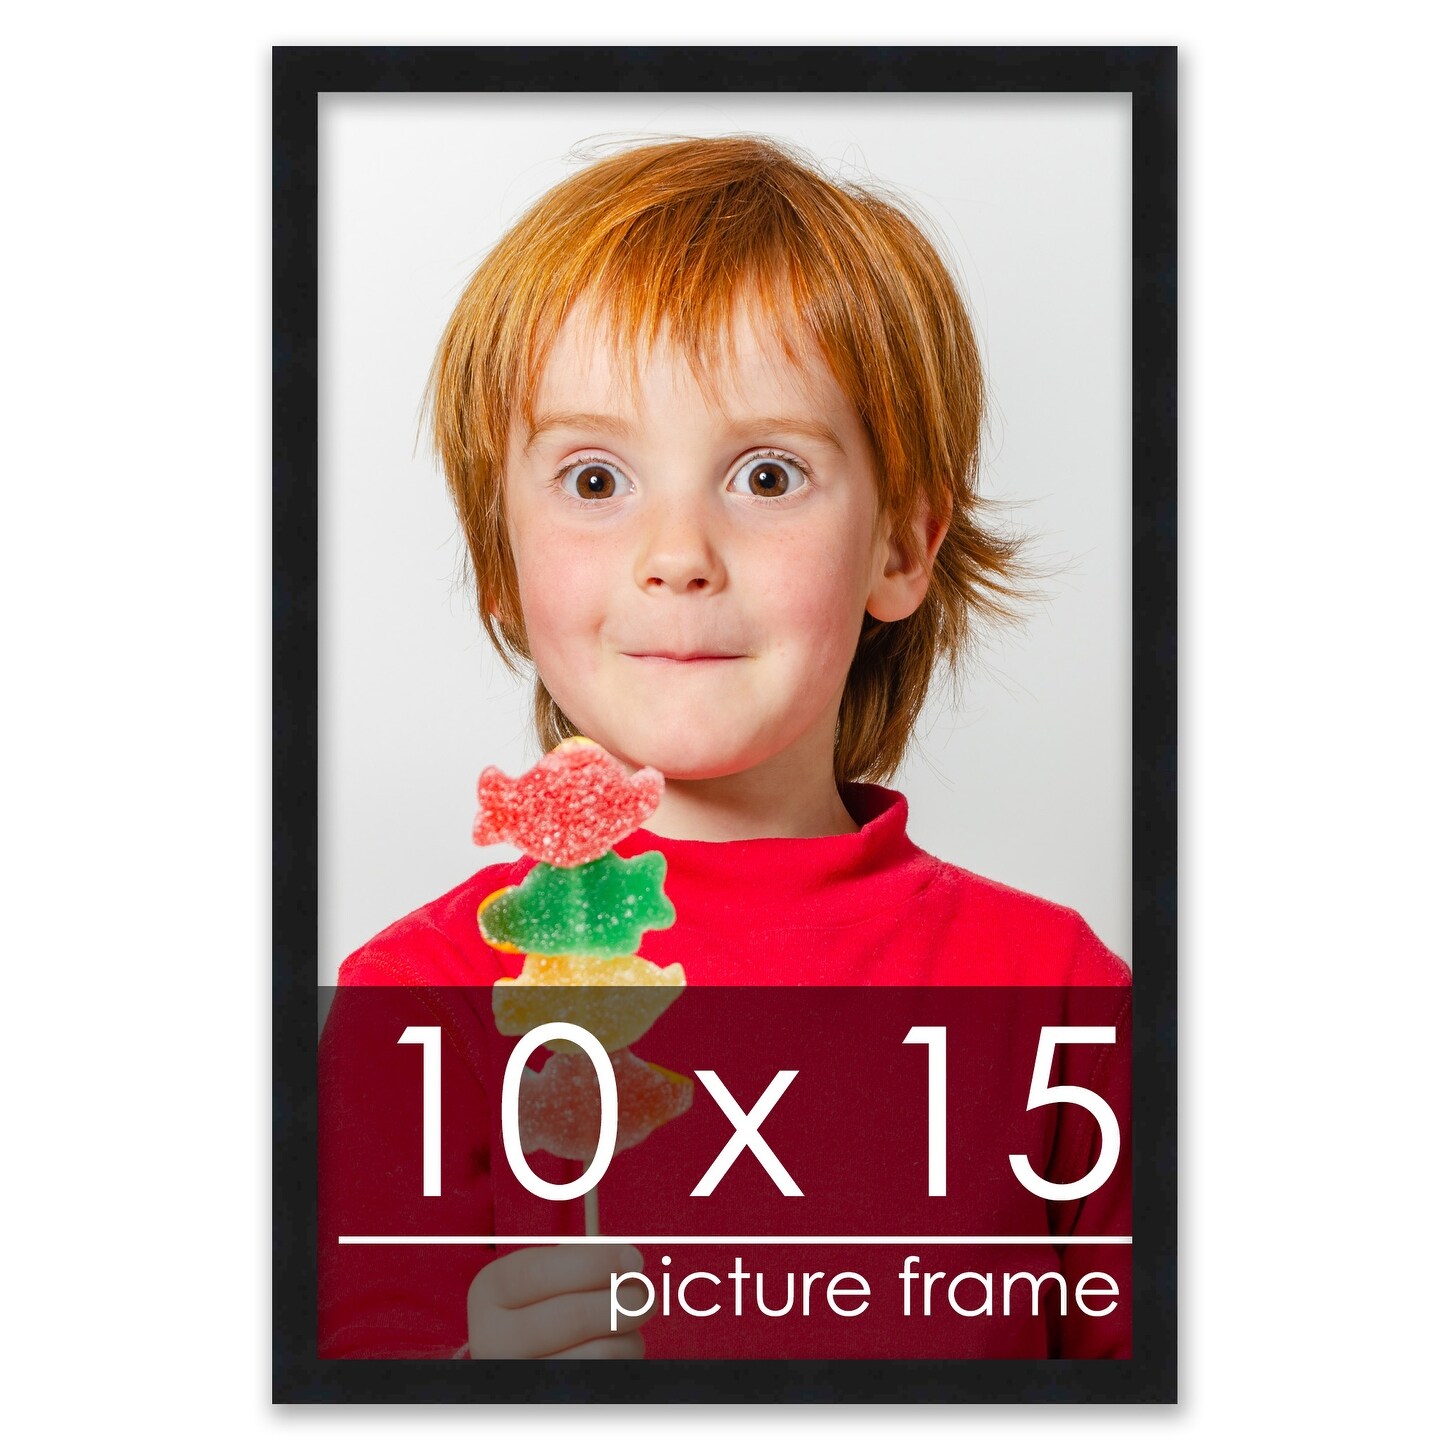 30x30 Picture Frame - Contemporary Picture Frame Complete With UV